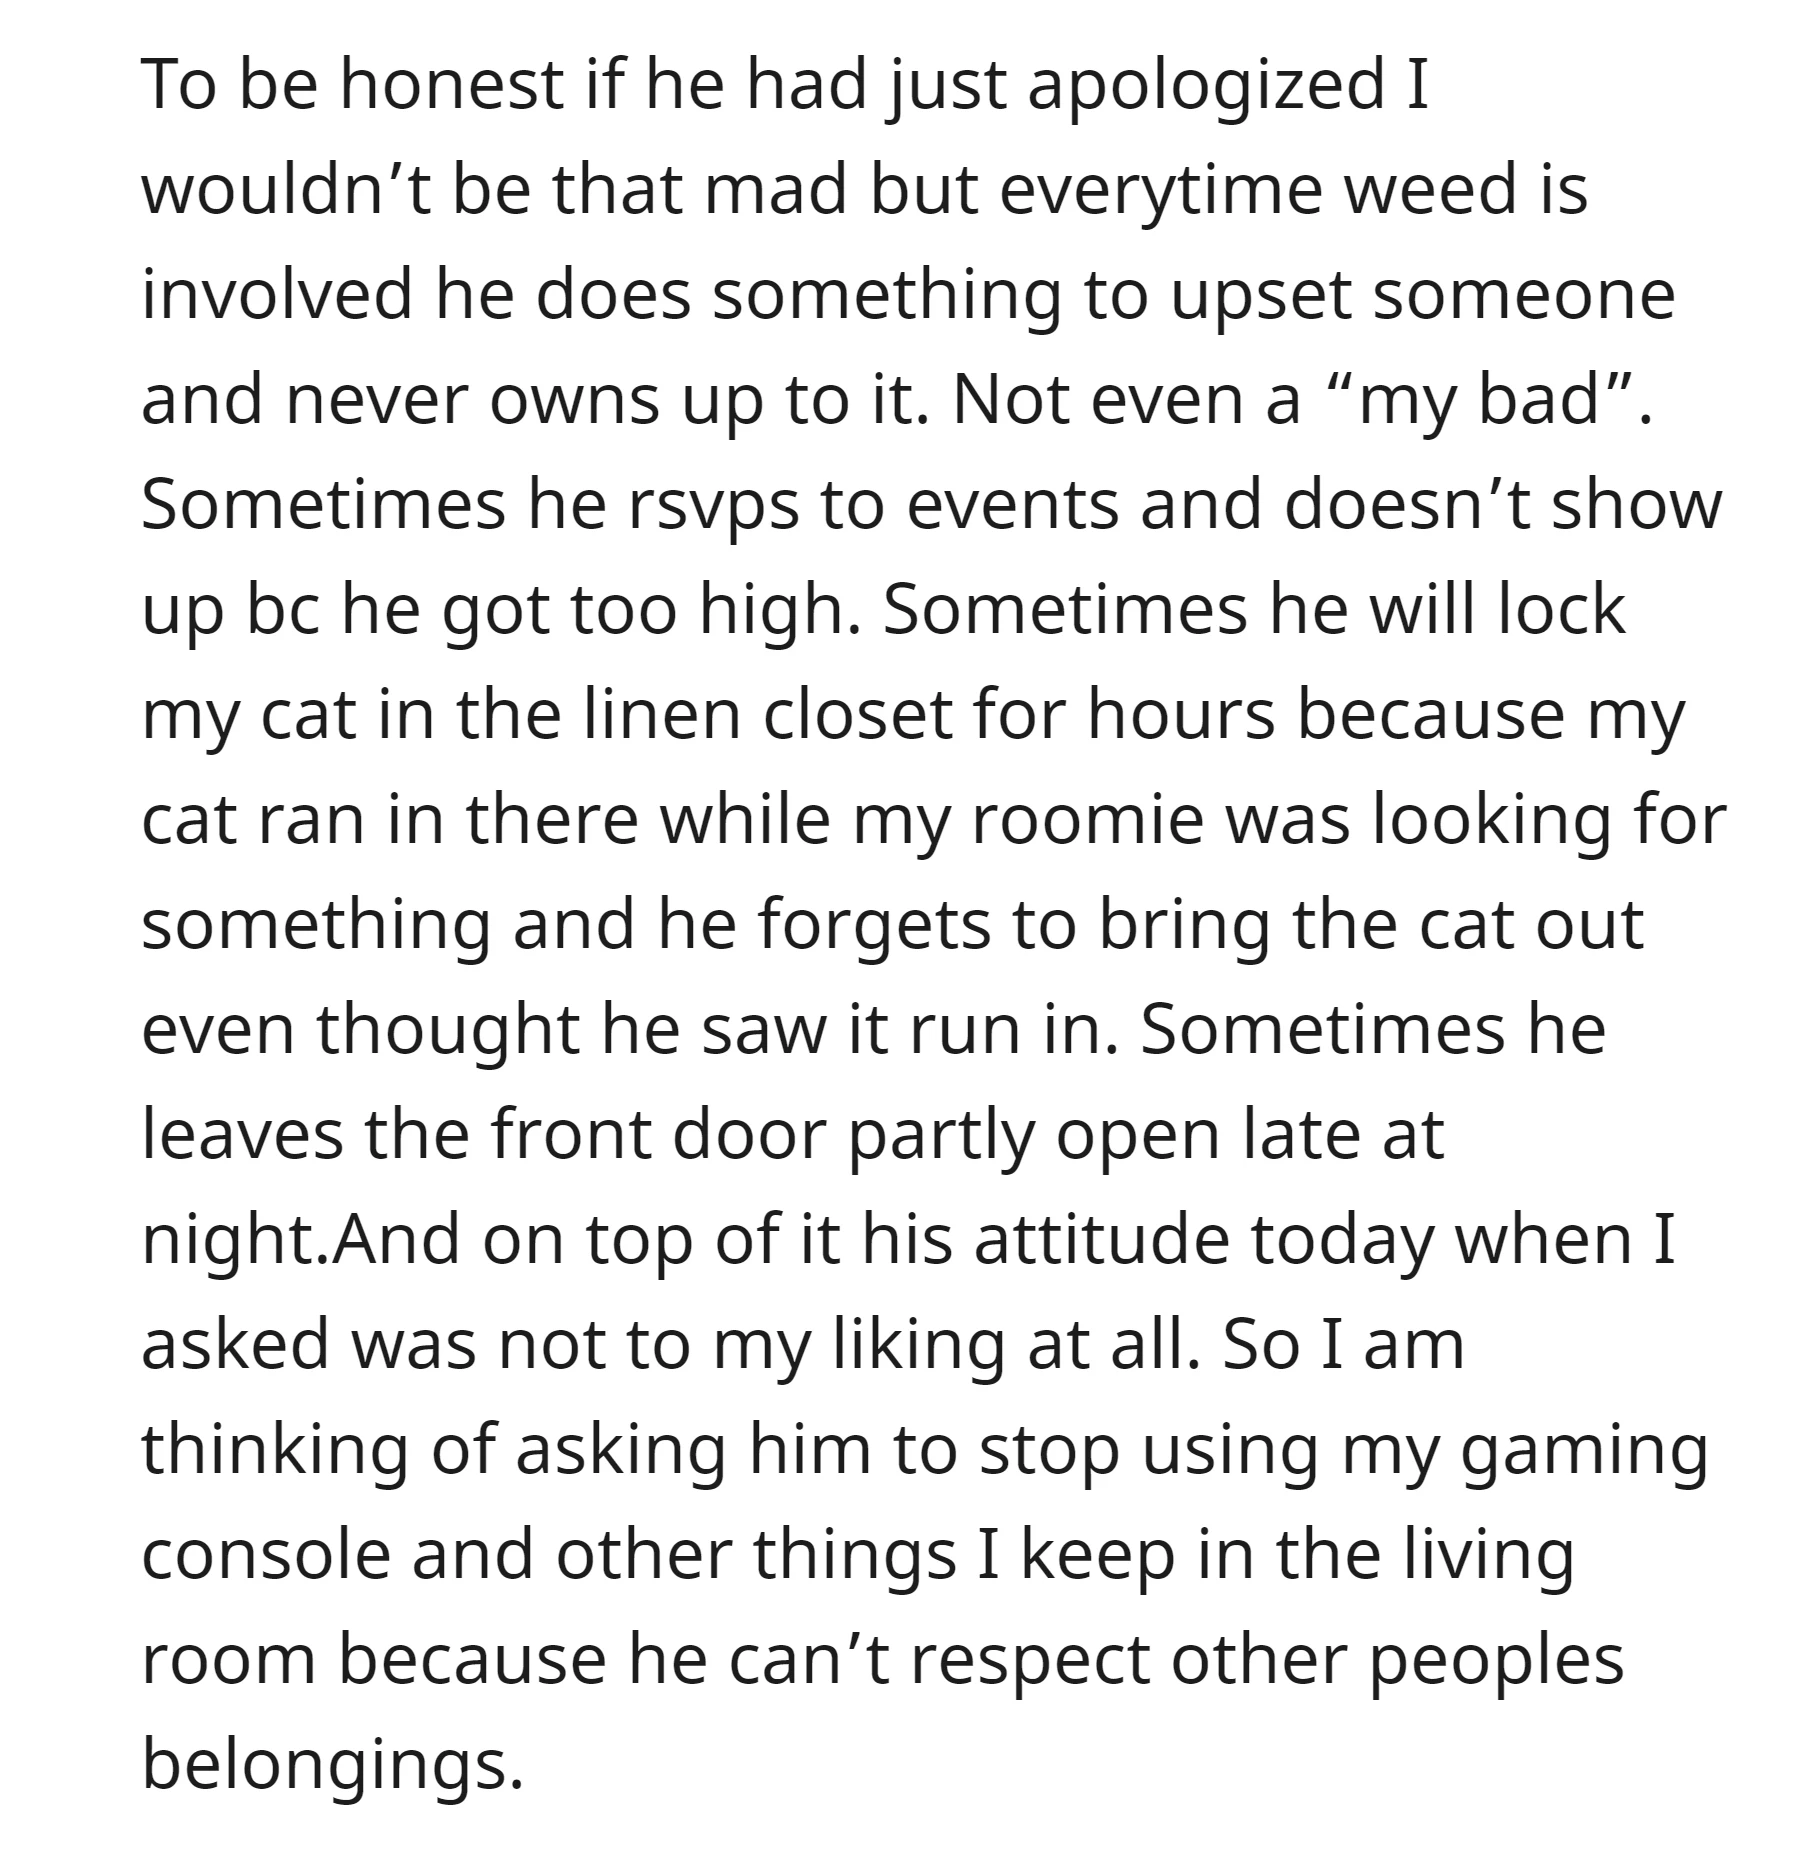 OP contemplates asking her roommate to refrain from using her gaming console and other shared items